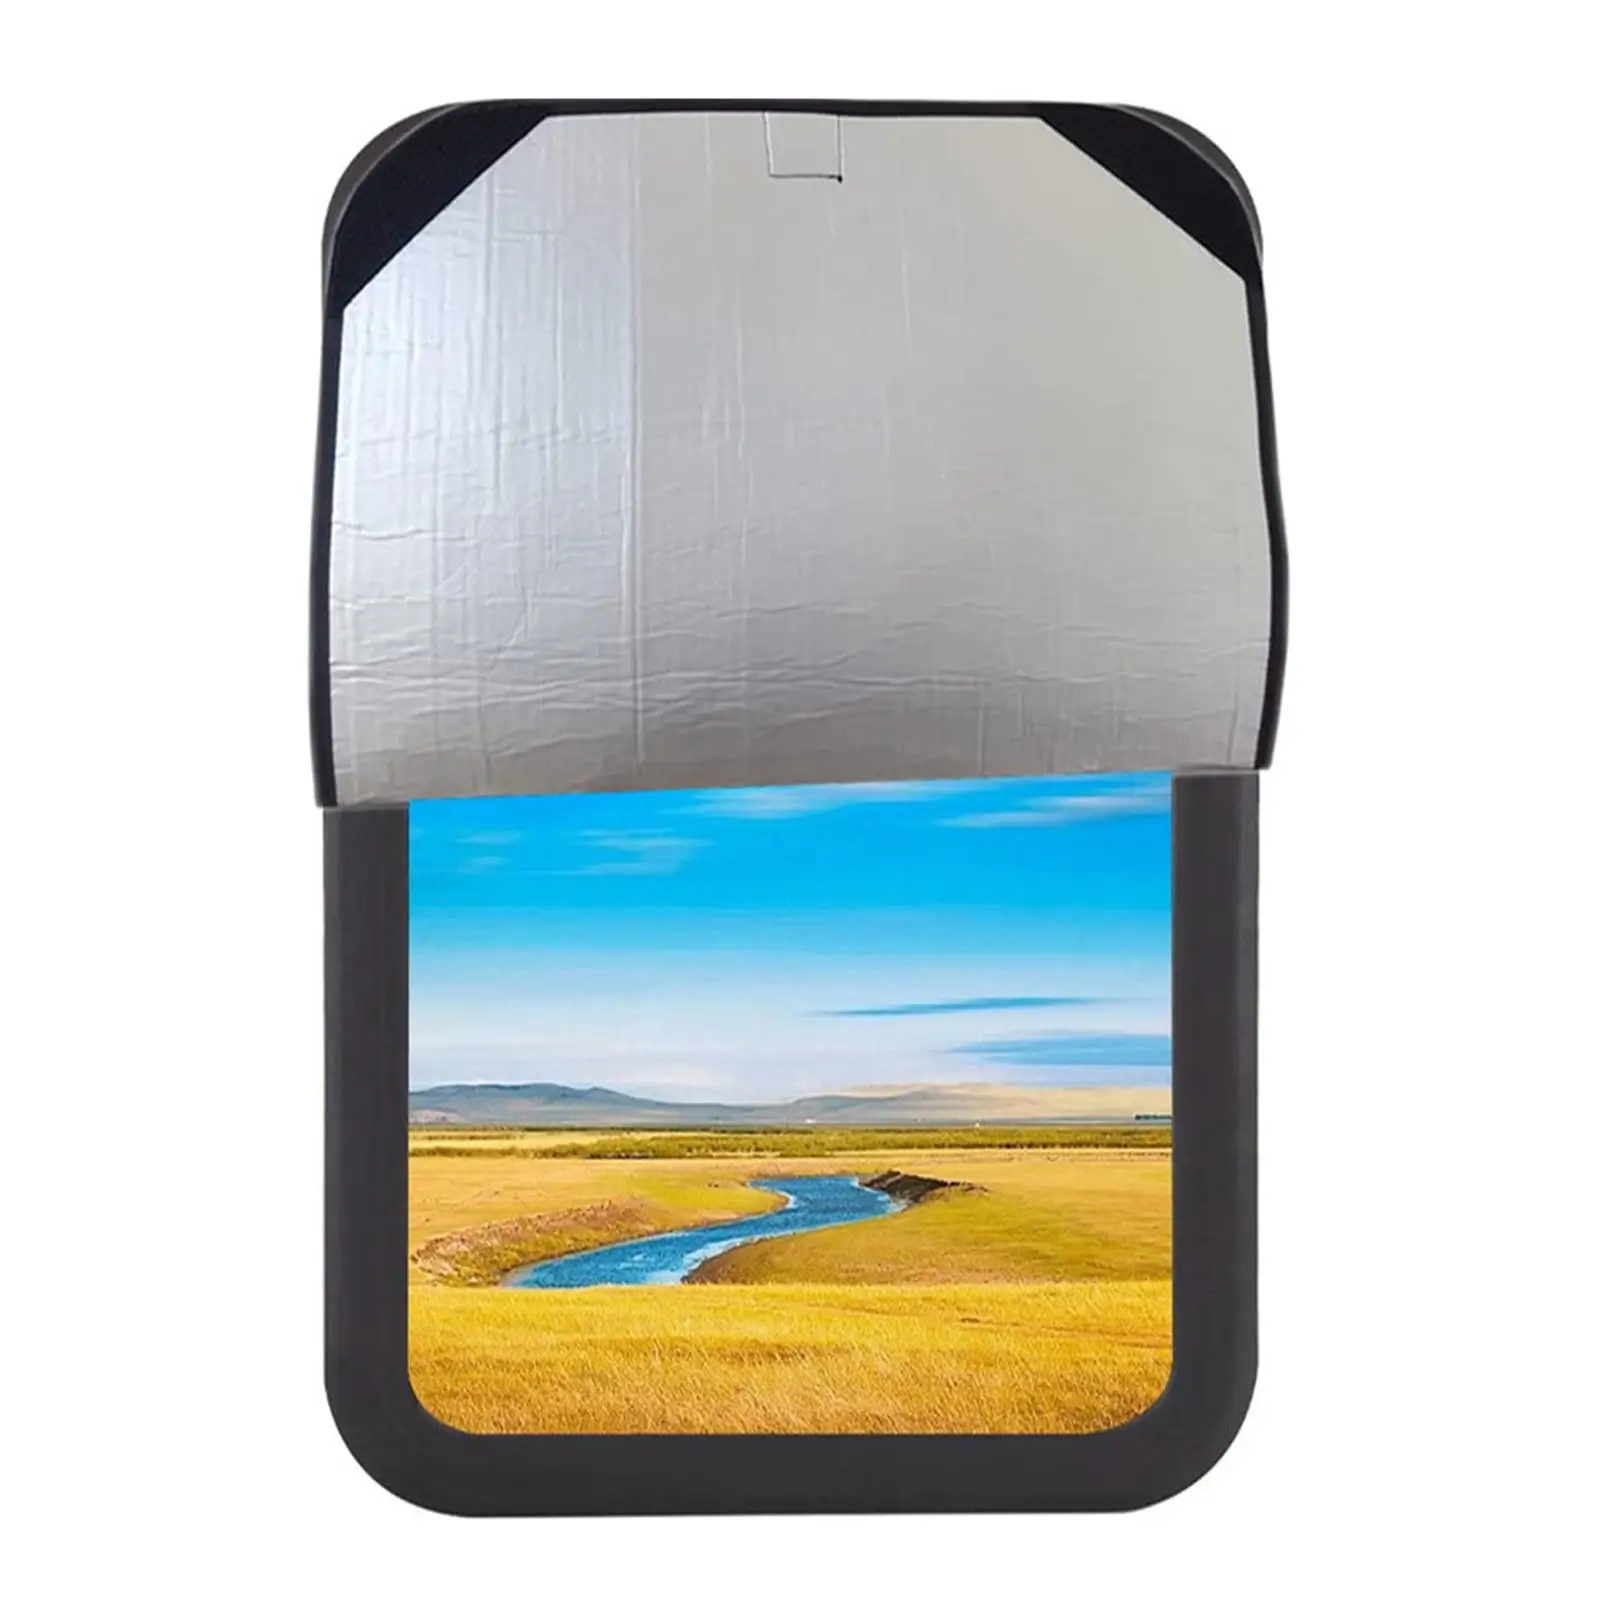 RV Window Shade Decoration Portable Keep The Vehicle Cool Waterproof and Dust Proof Sunshade for Travel Camper Motorhome